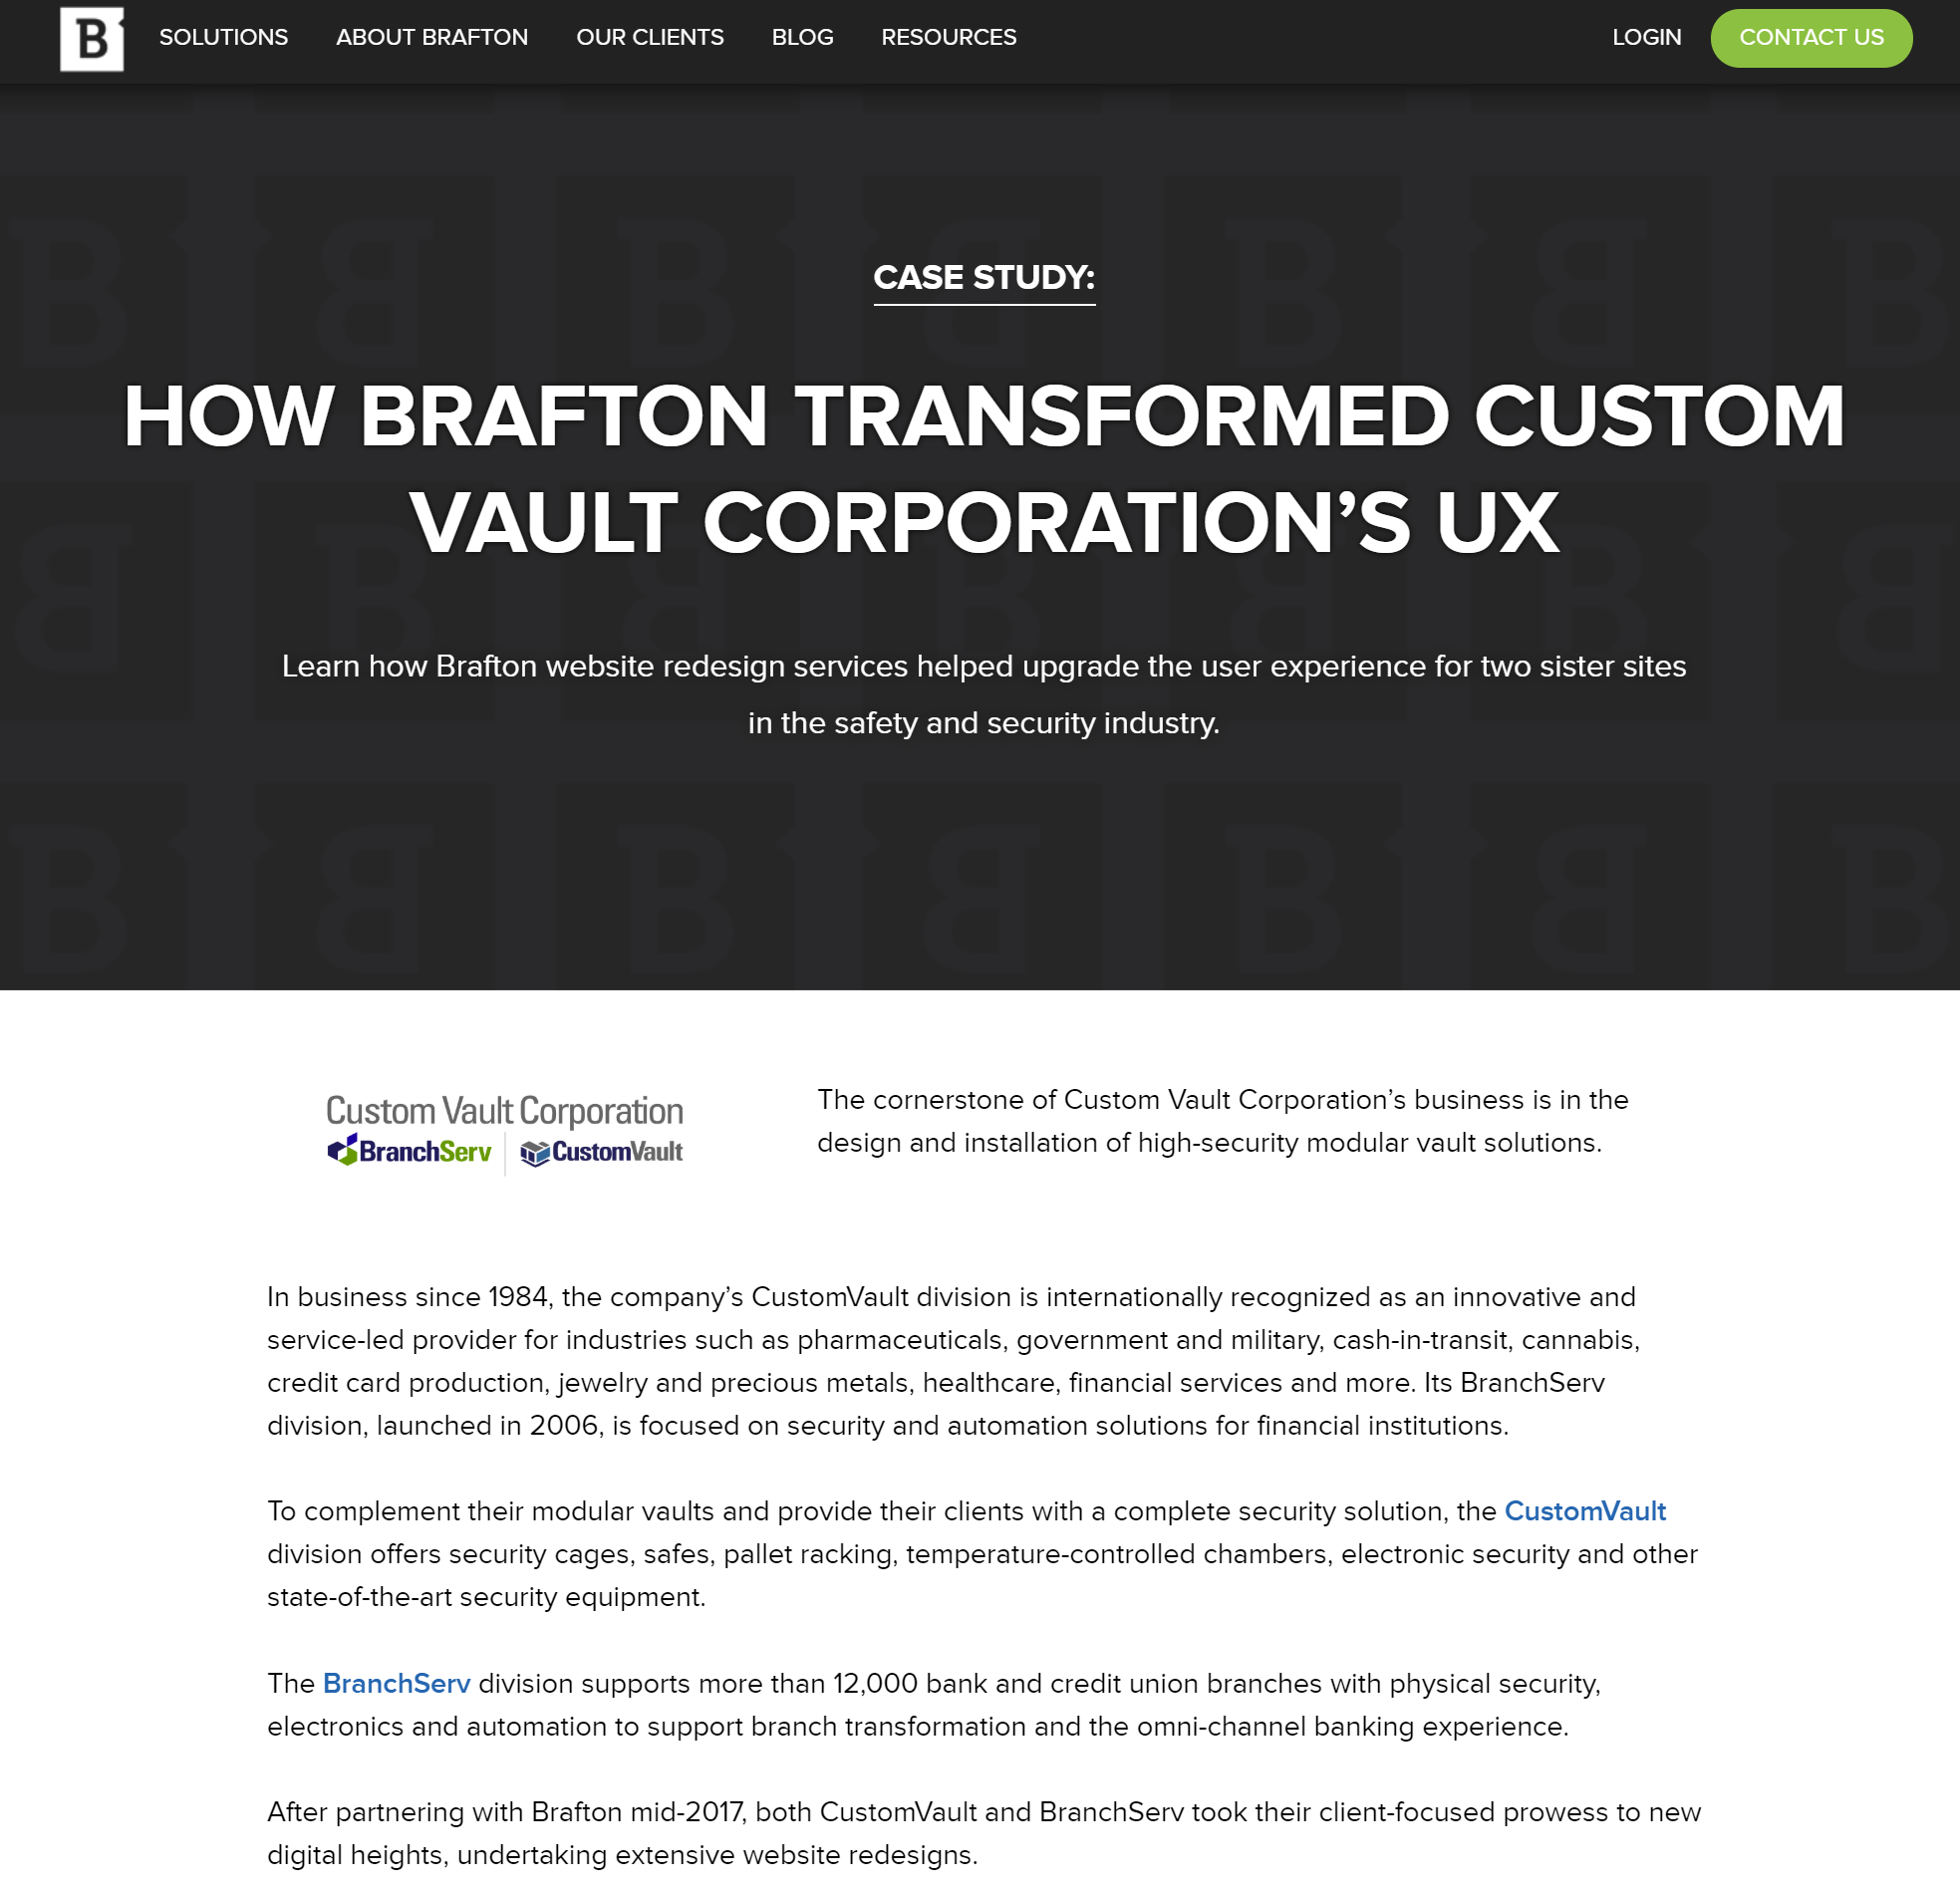 Example of a case study on Brafton's website